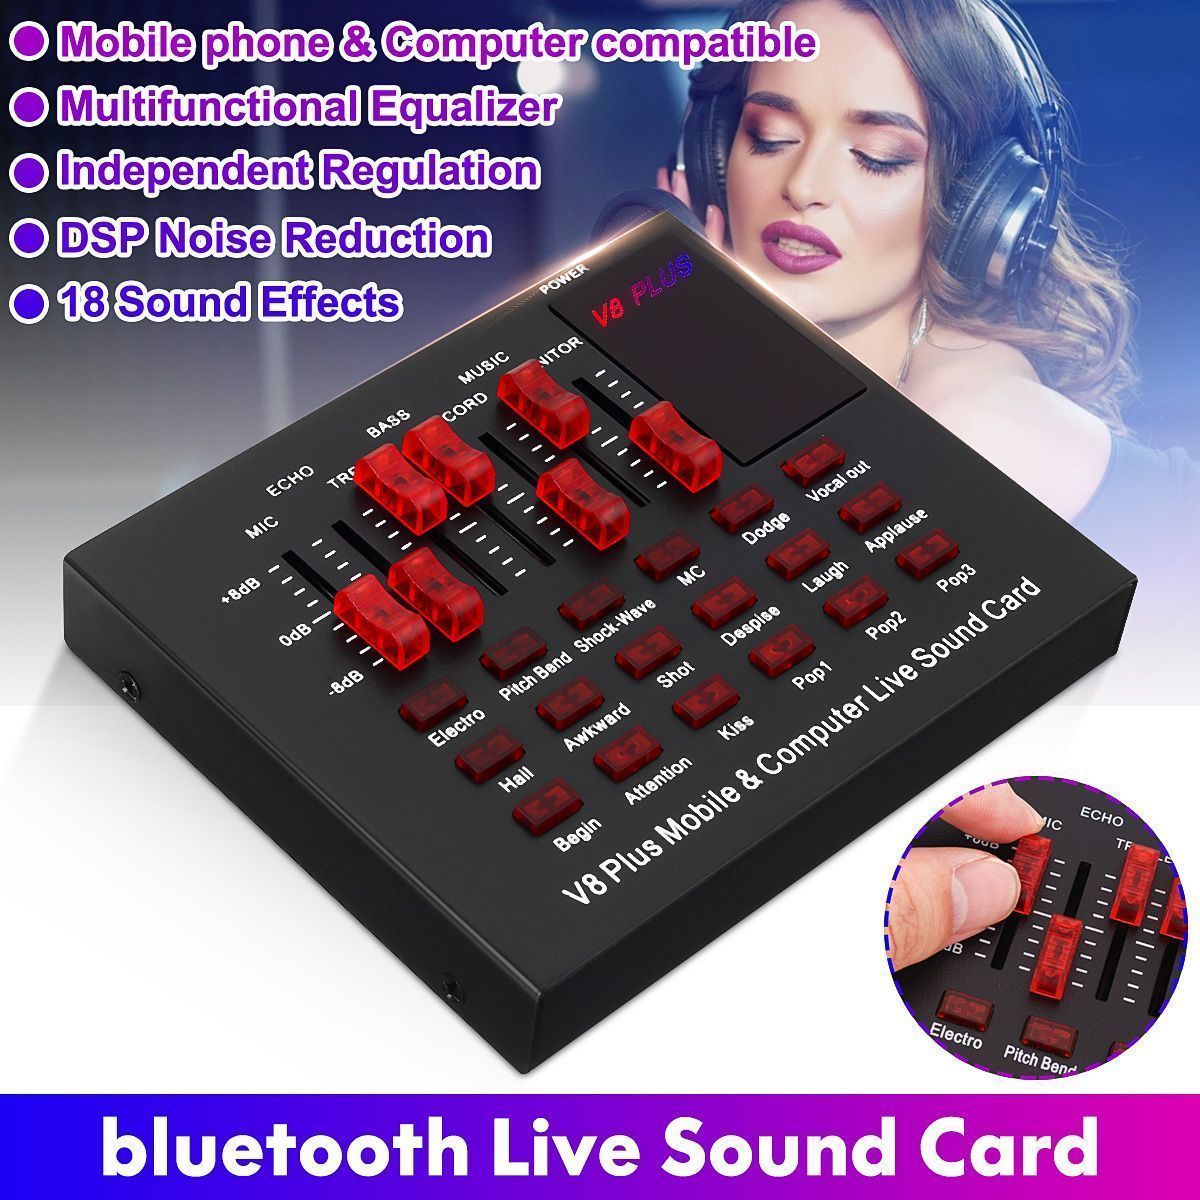 V8-PLUS-Dual-Channel-18-Sound-Effects-Live-Sound-Card-Support-Multifunctional-Equalizer-DSP-Noise-Re-1718550